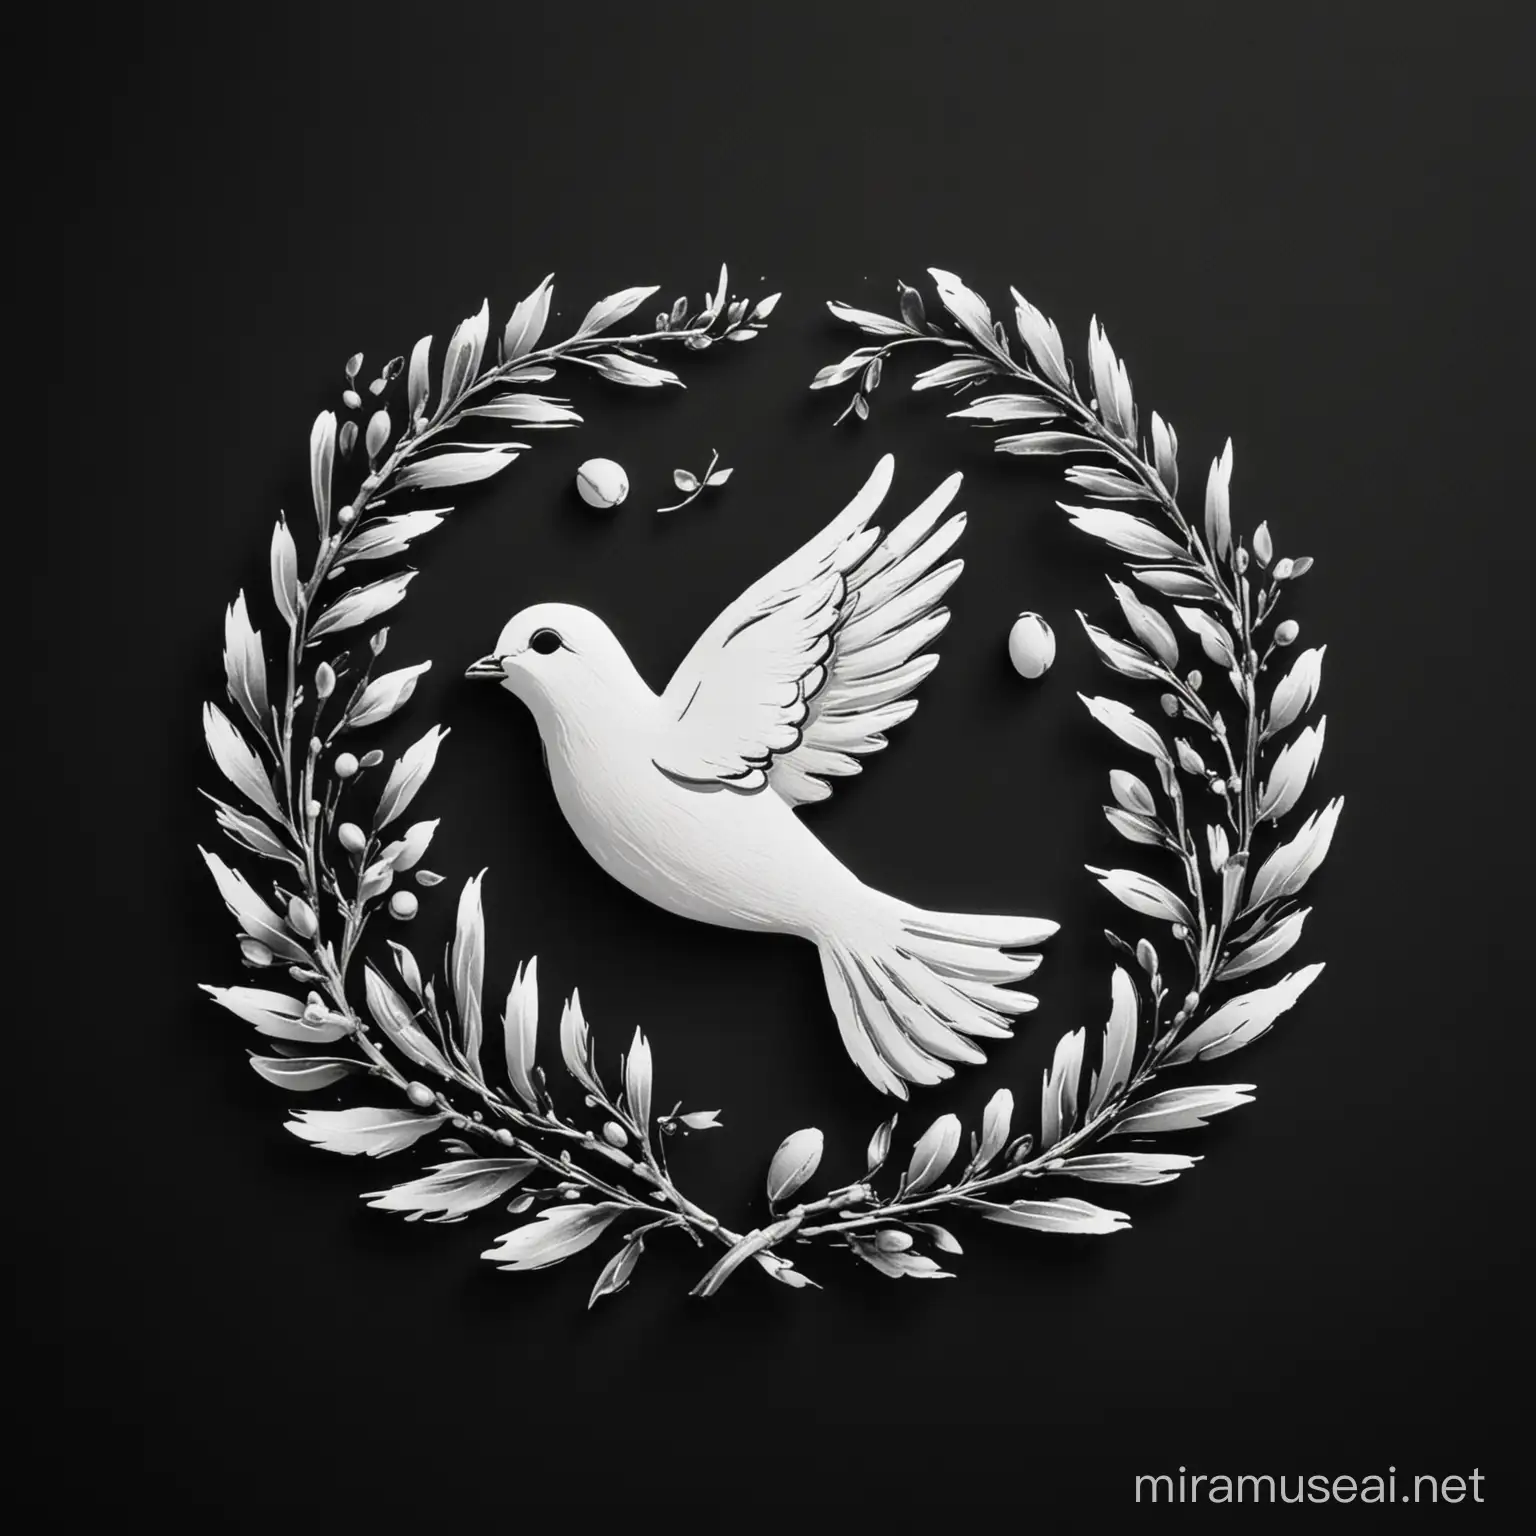 Monochrome Dove Icon with Olive Branches on Black Background